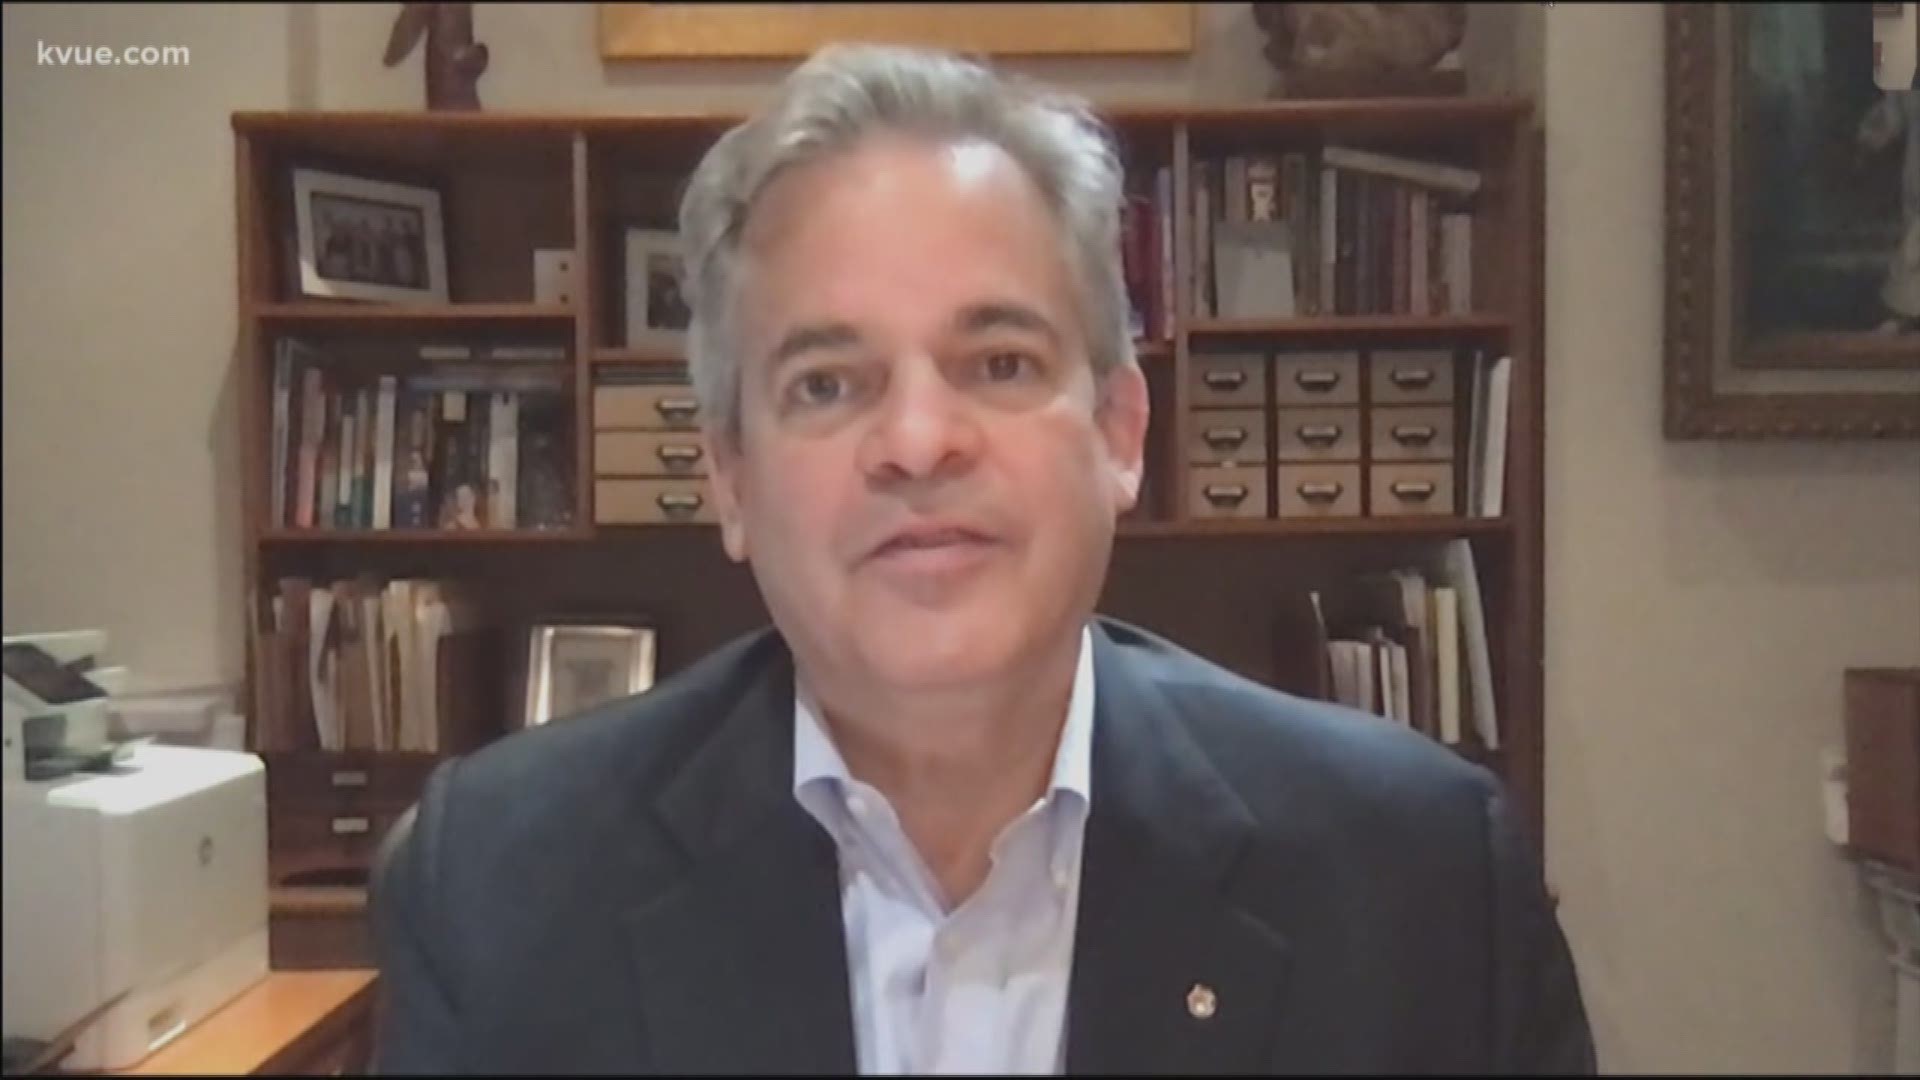 Mayor Steve Adler joined KVUE to talk about what's next for Austin.